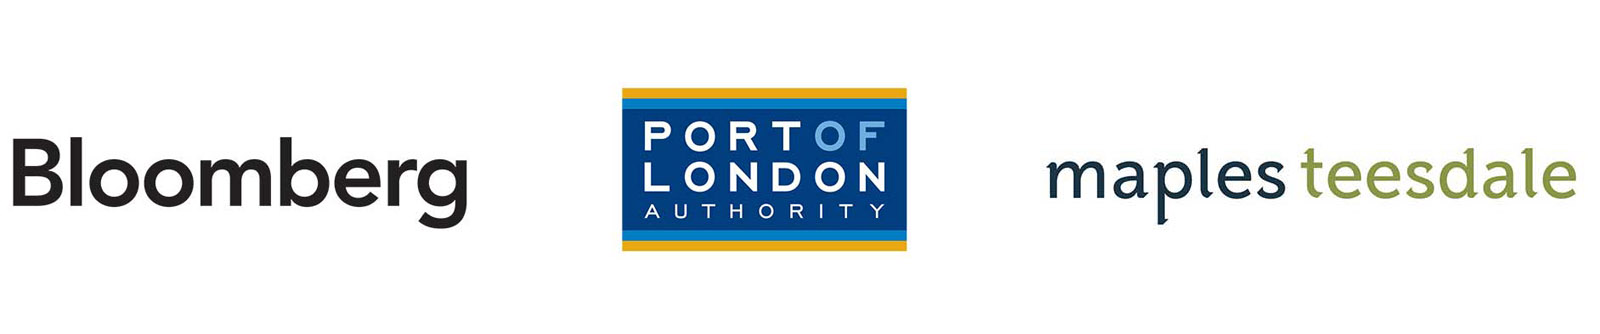 Corporate Members: Bloomberg; Port of London Authority; Maples teesdale